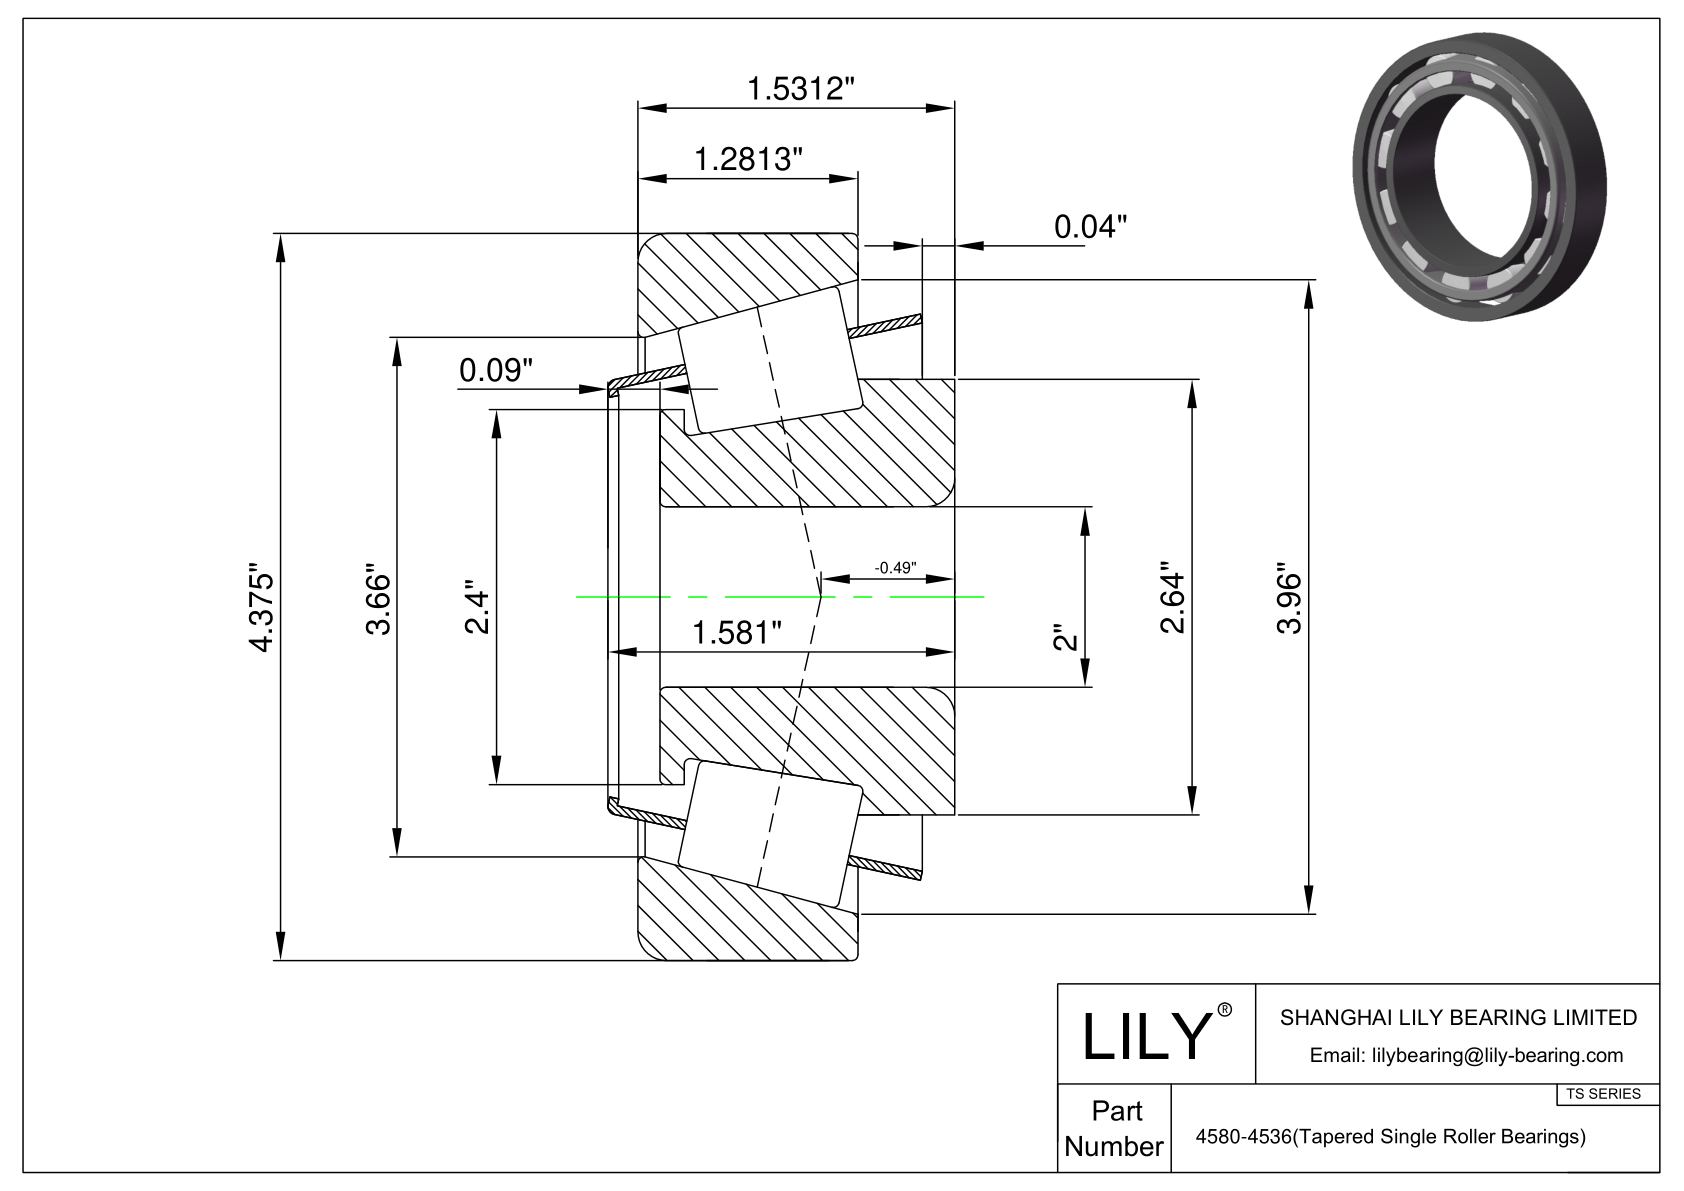 4580-4536 TS (Tapered Single Roller Bearings) (Imperial) cad drawing